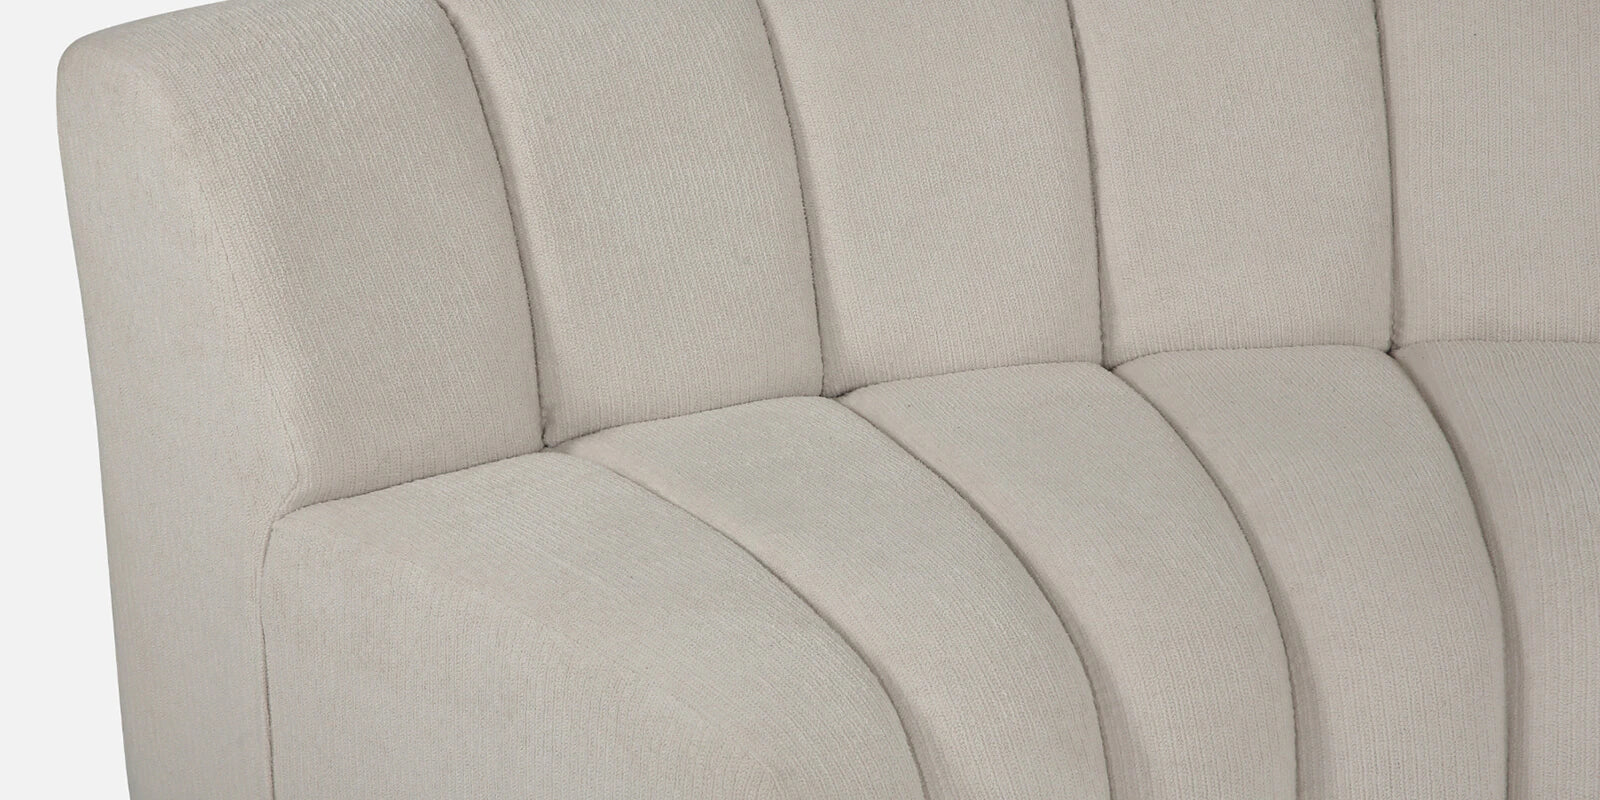 Boucle Fabric 3 Seater Curve Shaped Sofa in Off White Colour